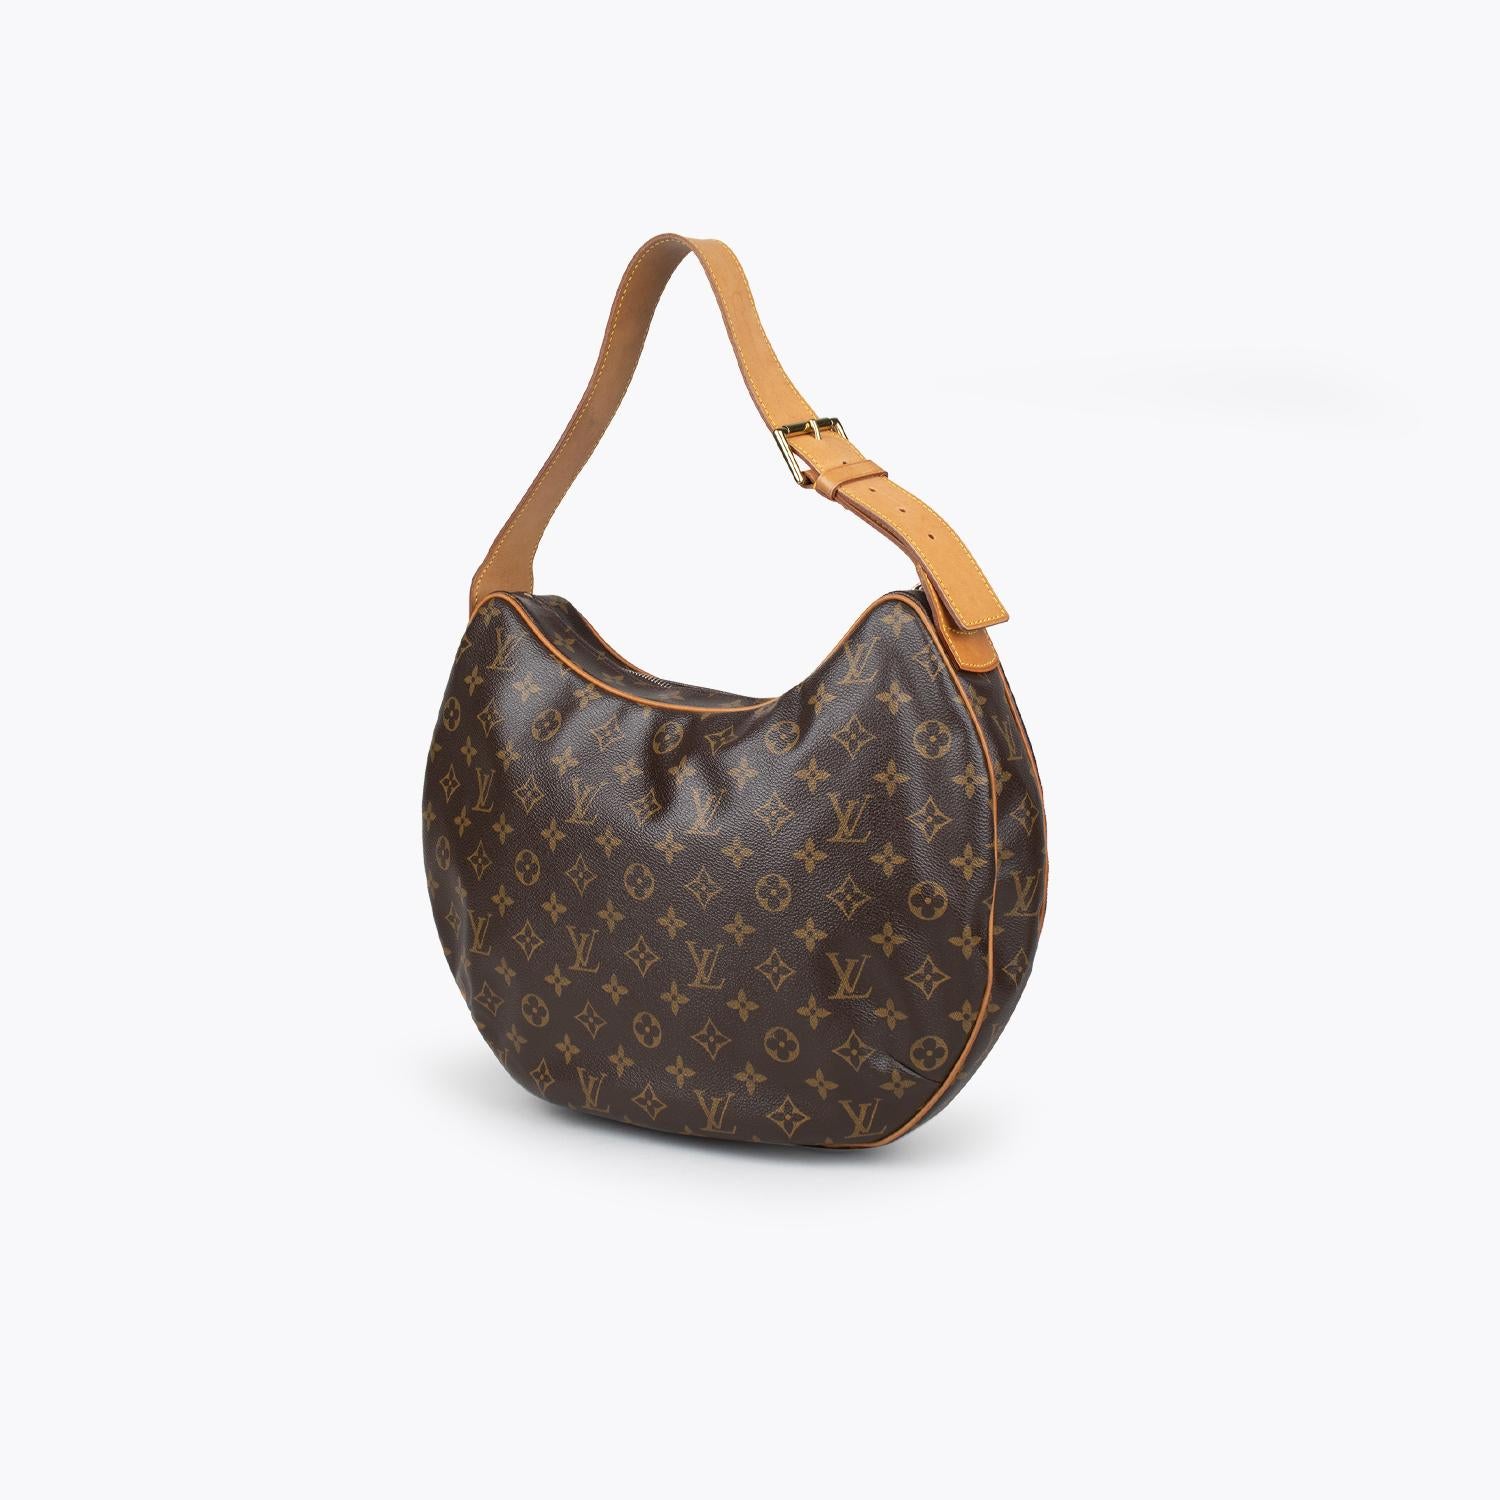 Brown and tan monogram coated canvas Louis Vuitton Croissant GM with

- Brass hardware
- Logo adornment at front
- Single leather adjustable shoulder strap
- Tan vachetta leather trim
- Crimson Alcantara lining, dual slit pockets at interior wall